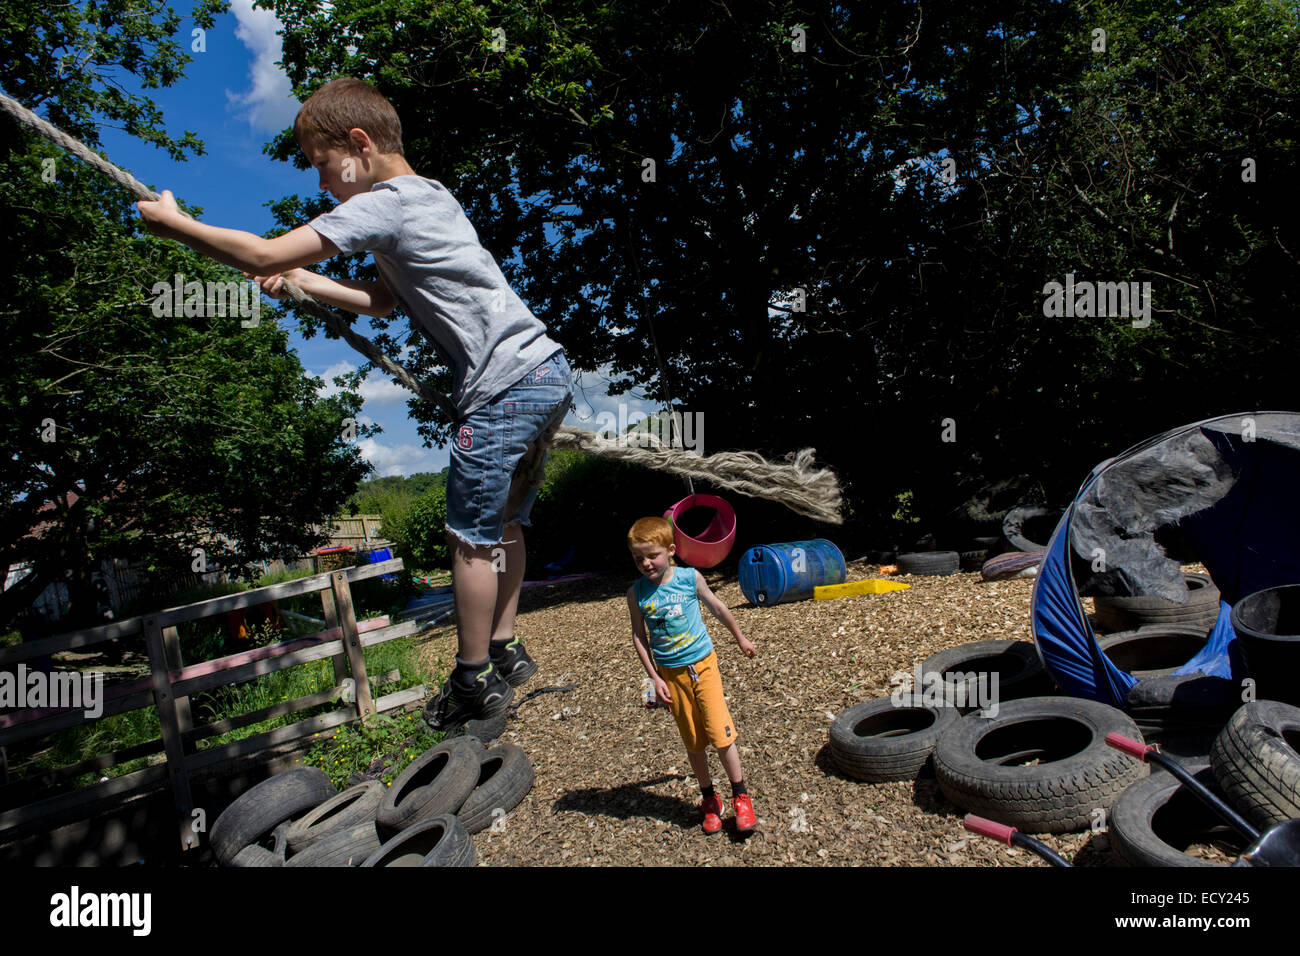 Boys play in risk averse playground called The Land on Plas Madoc Estate, Ruabon, Wrexham, Wales. Stock Photo